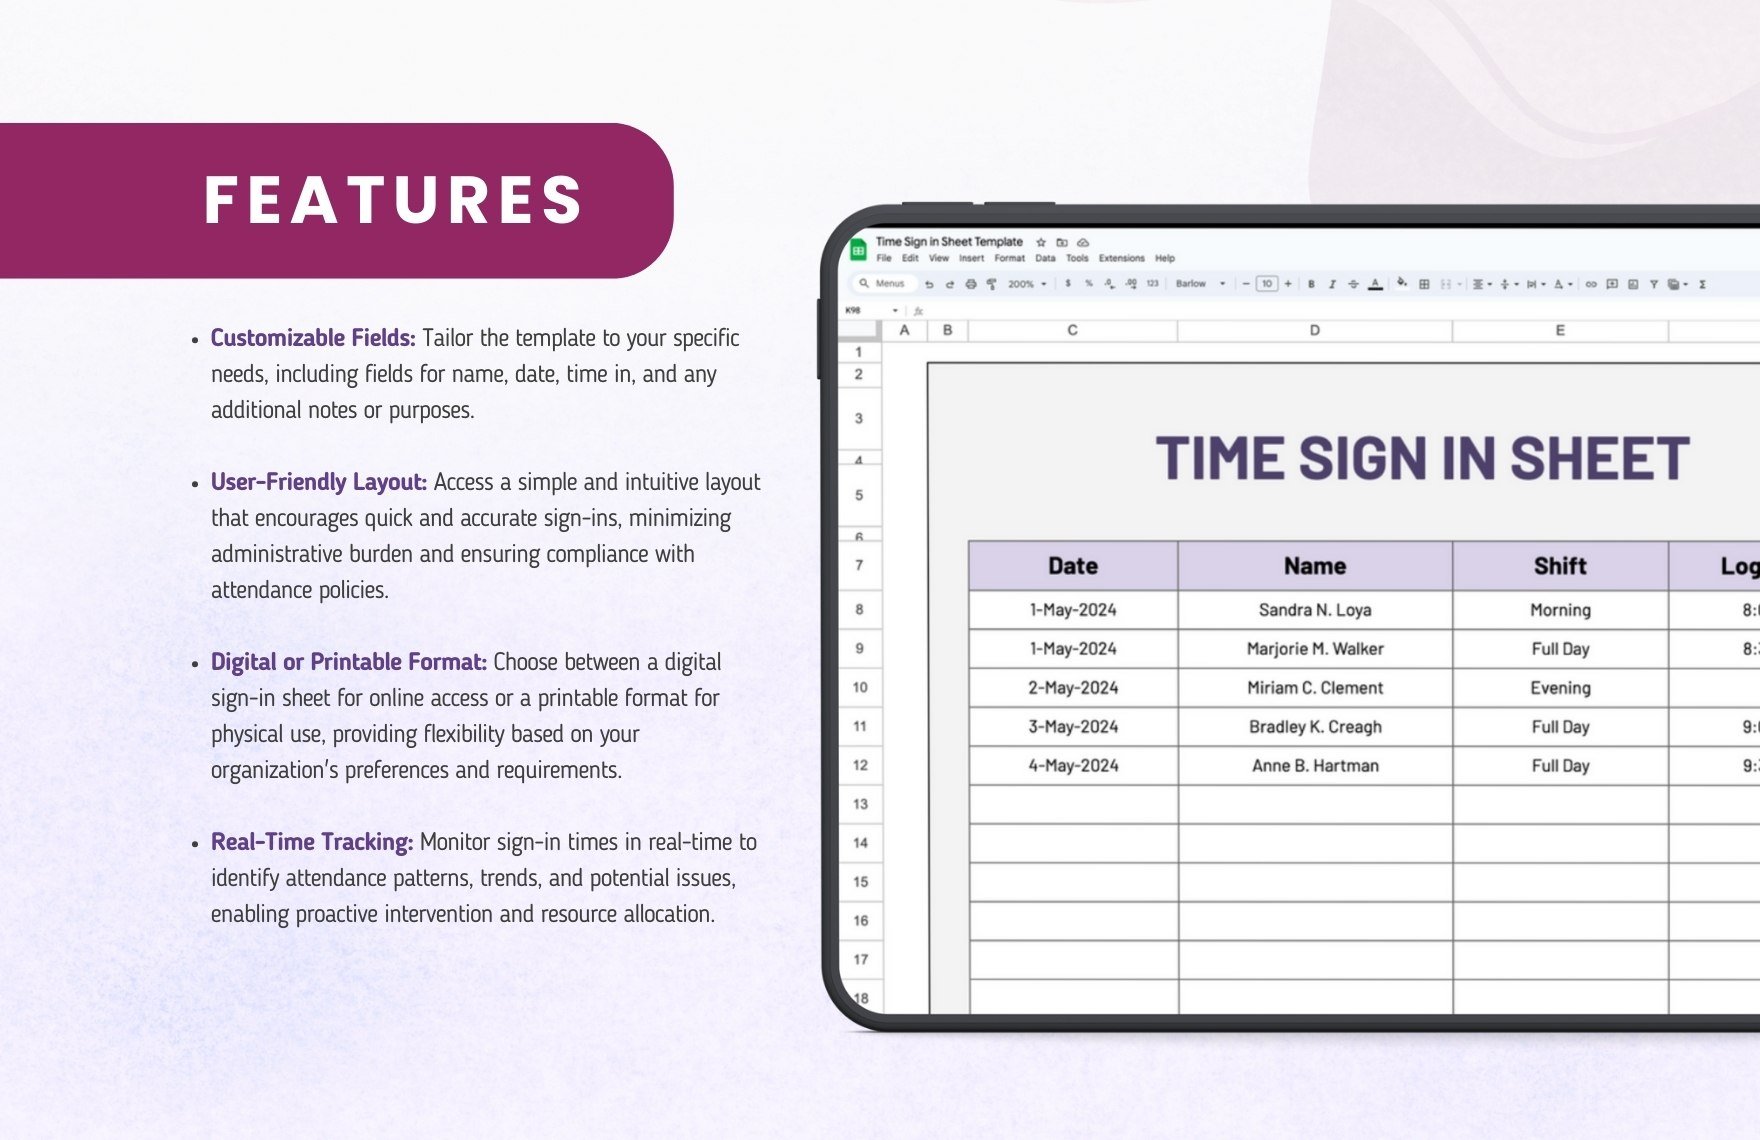 Time Sign in Sheet Template